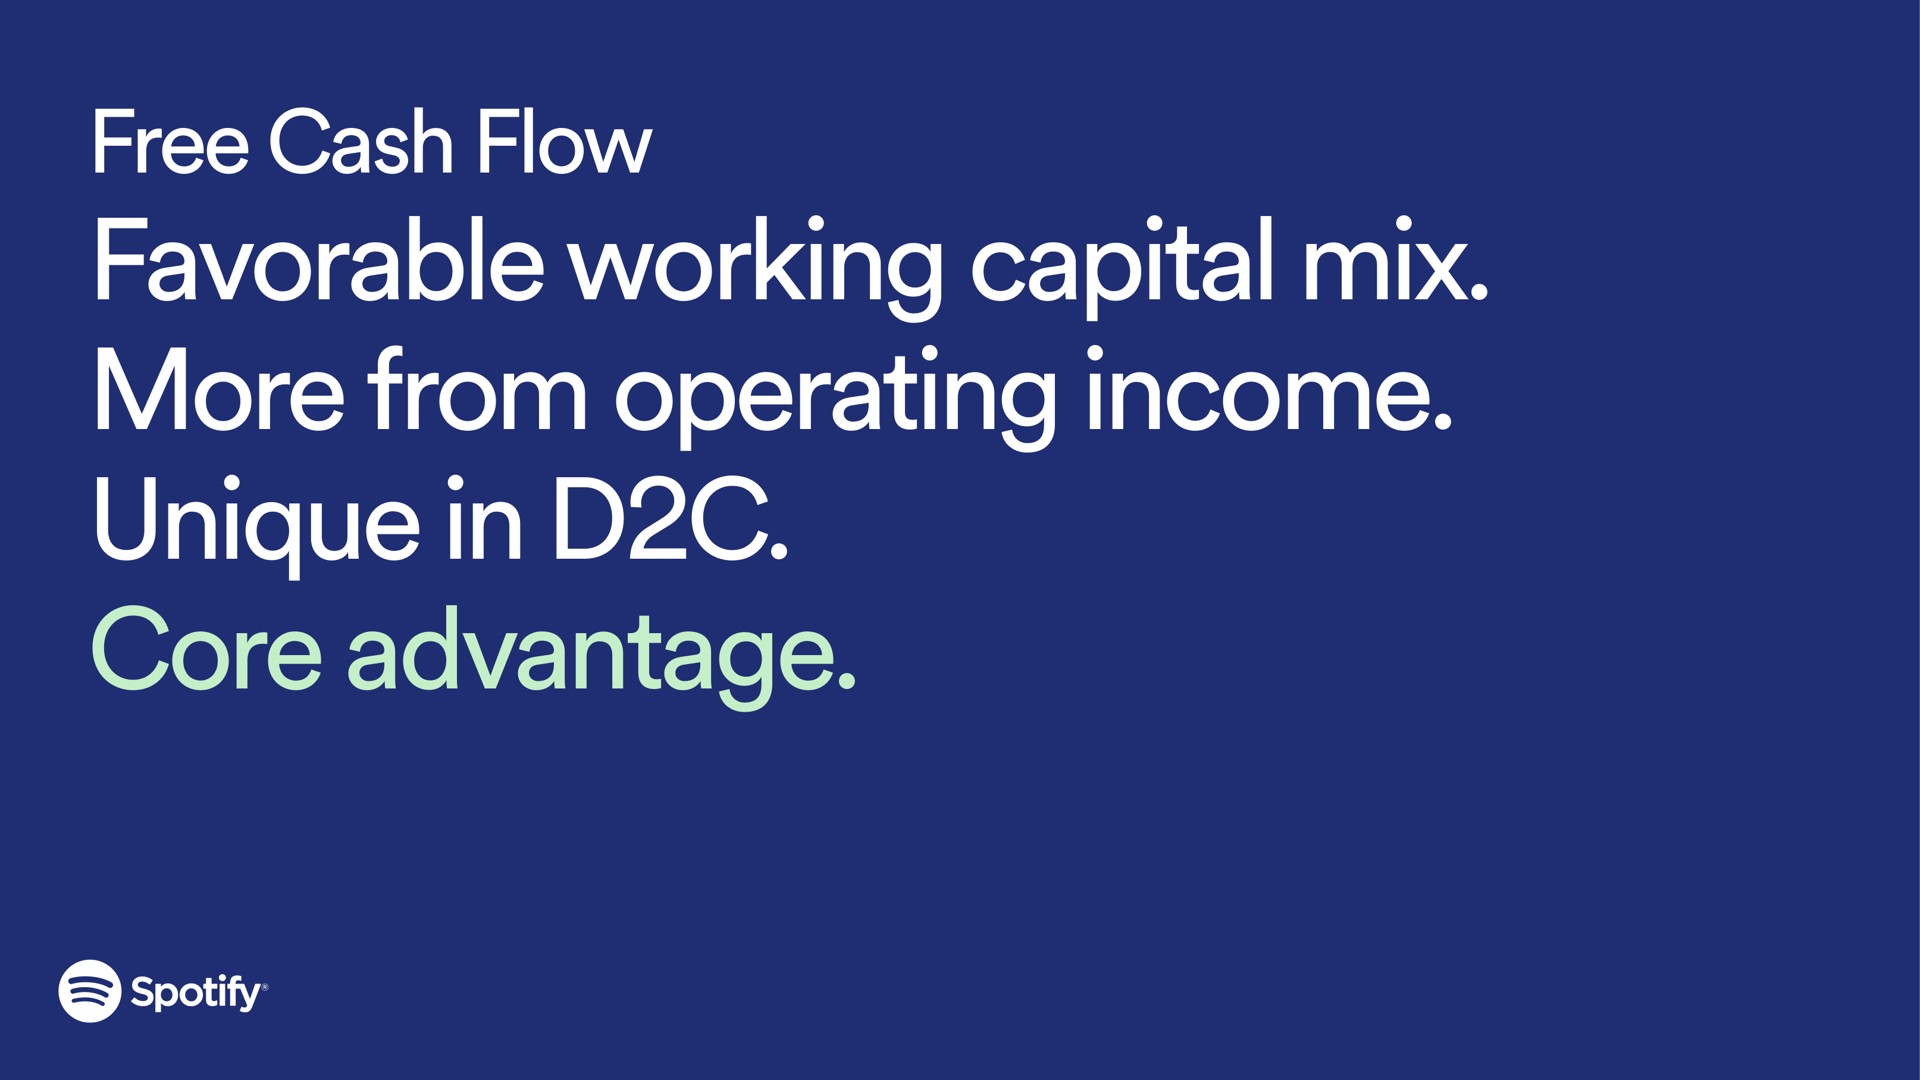 free cash flow favorable working capital mix more from operating income unique in core advantage | Spotify